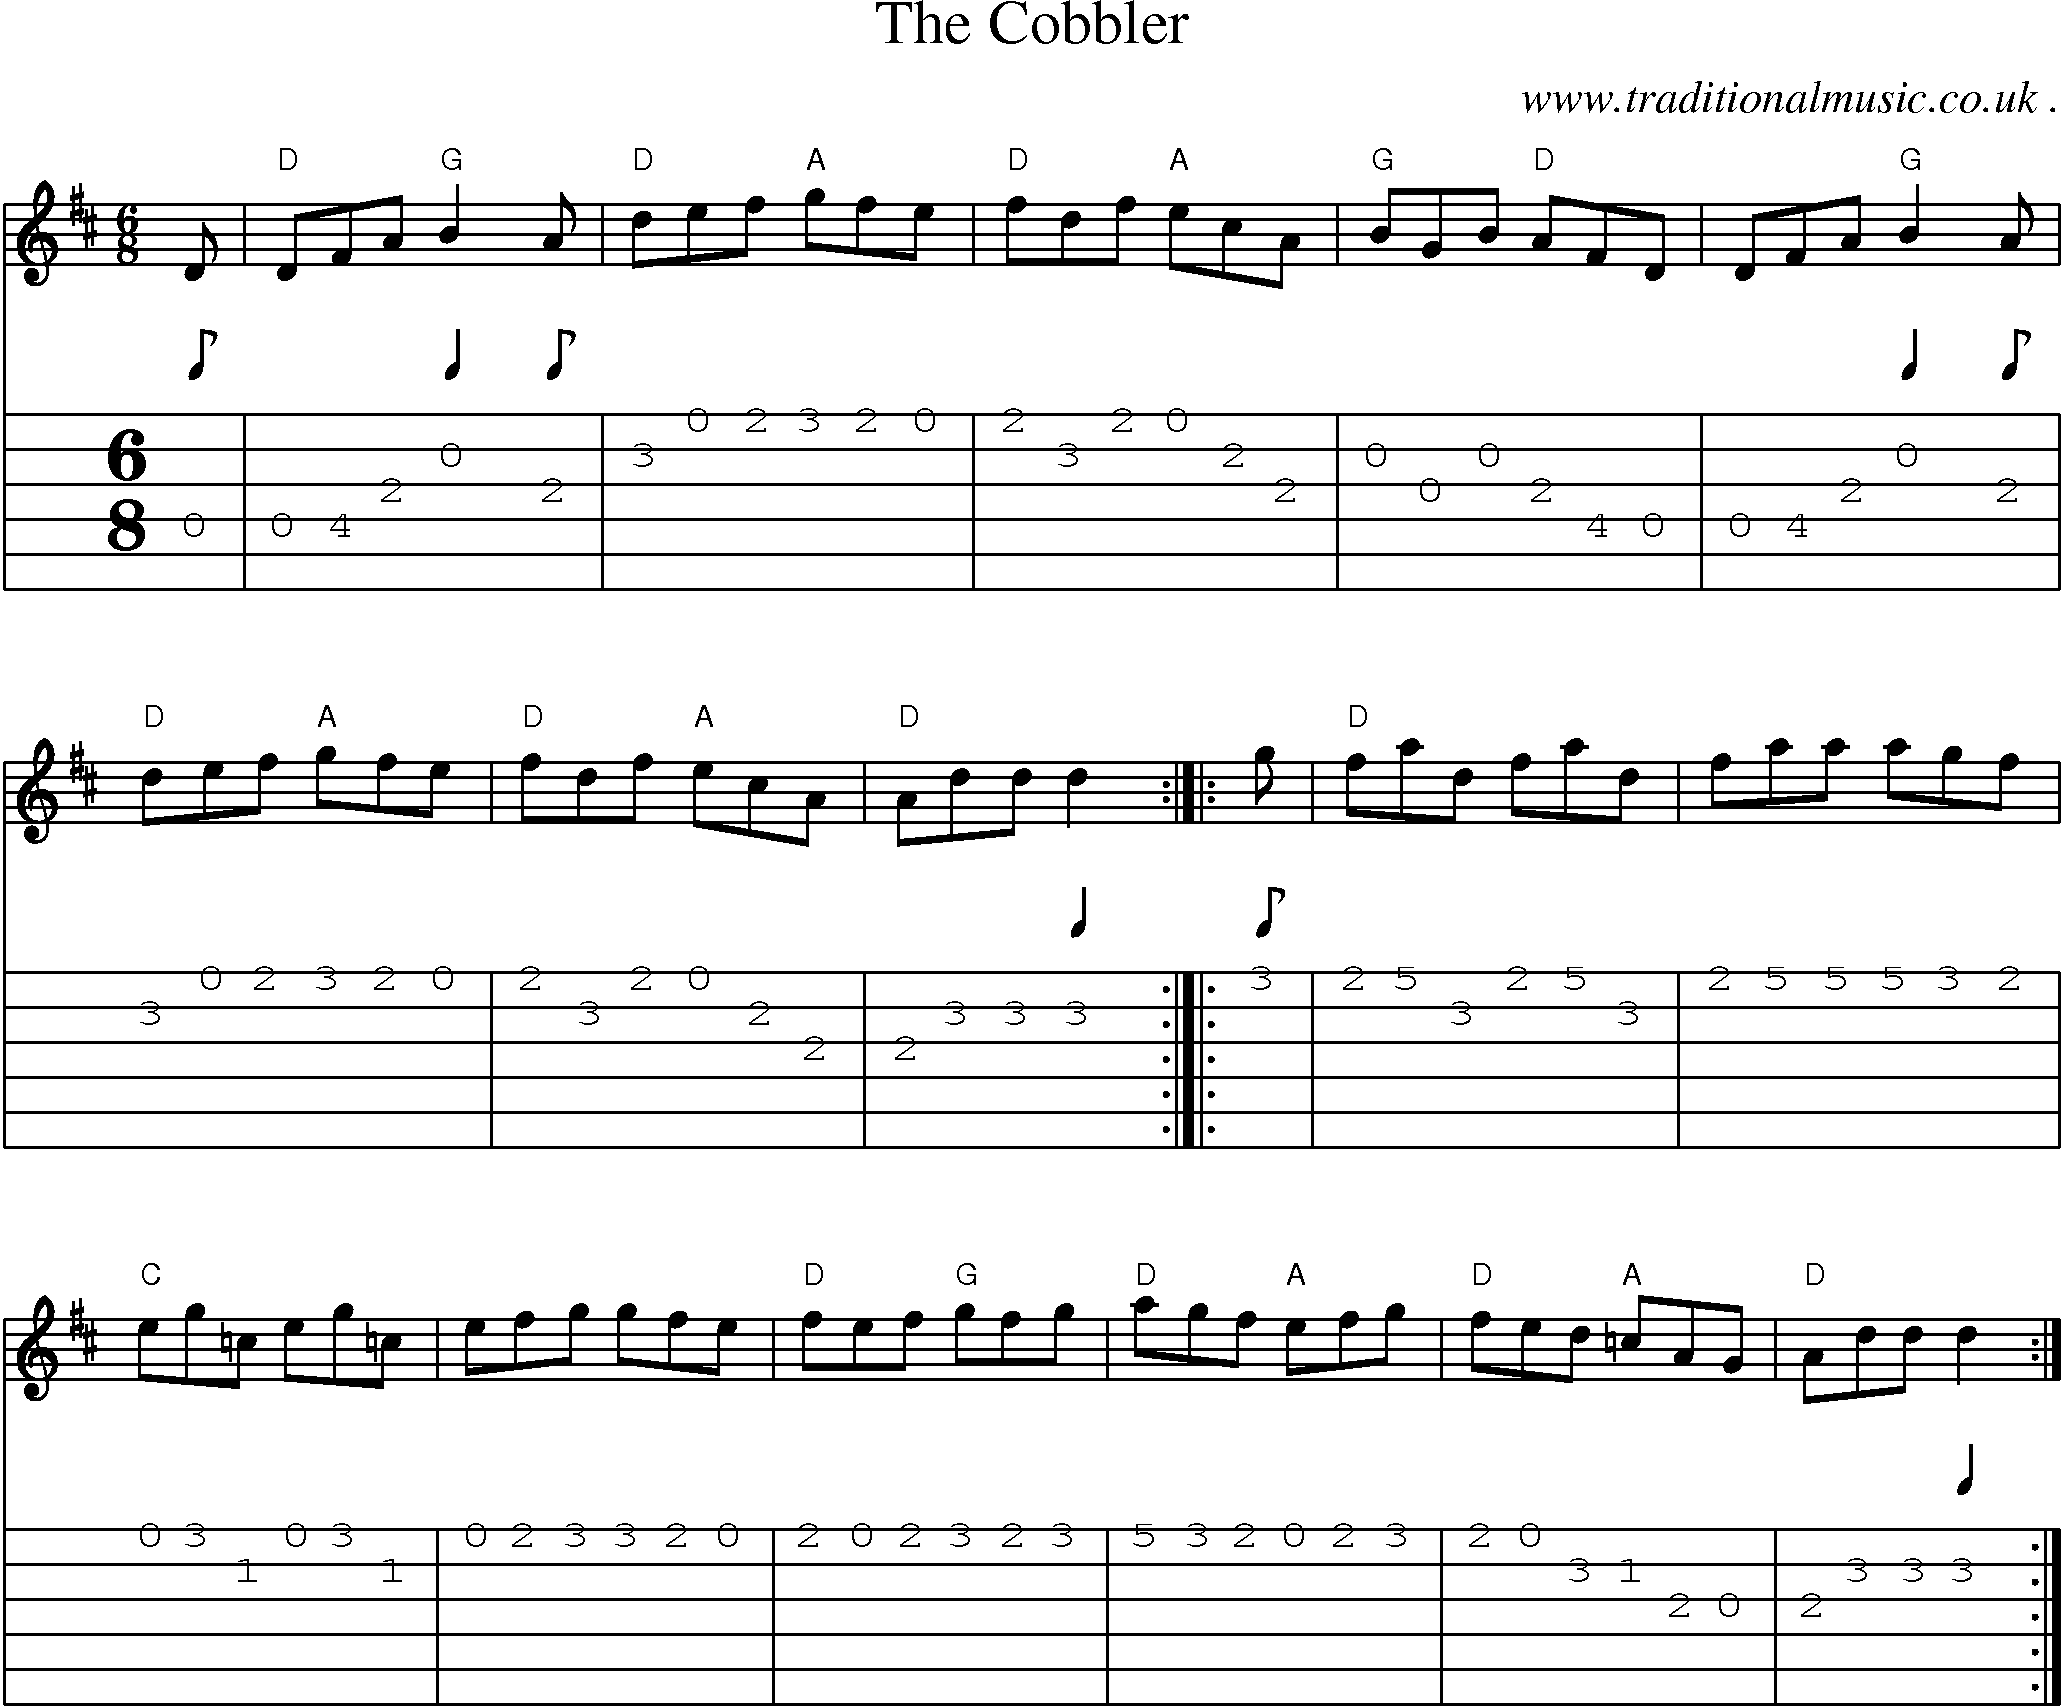 Music Score and Guitar Tabs for The Cobbler